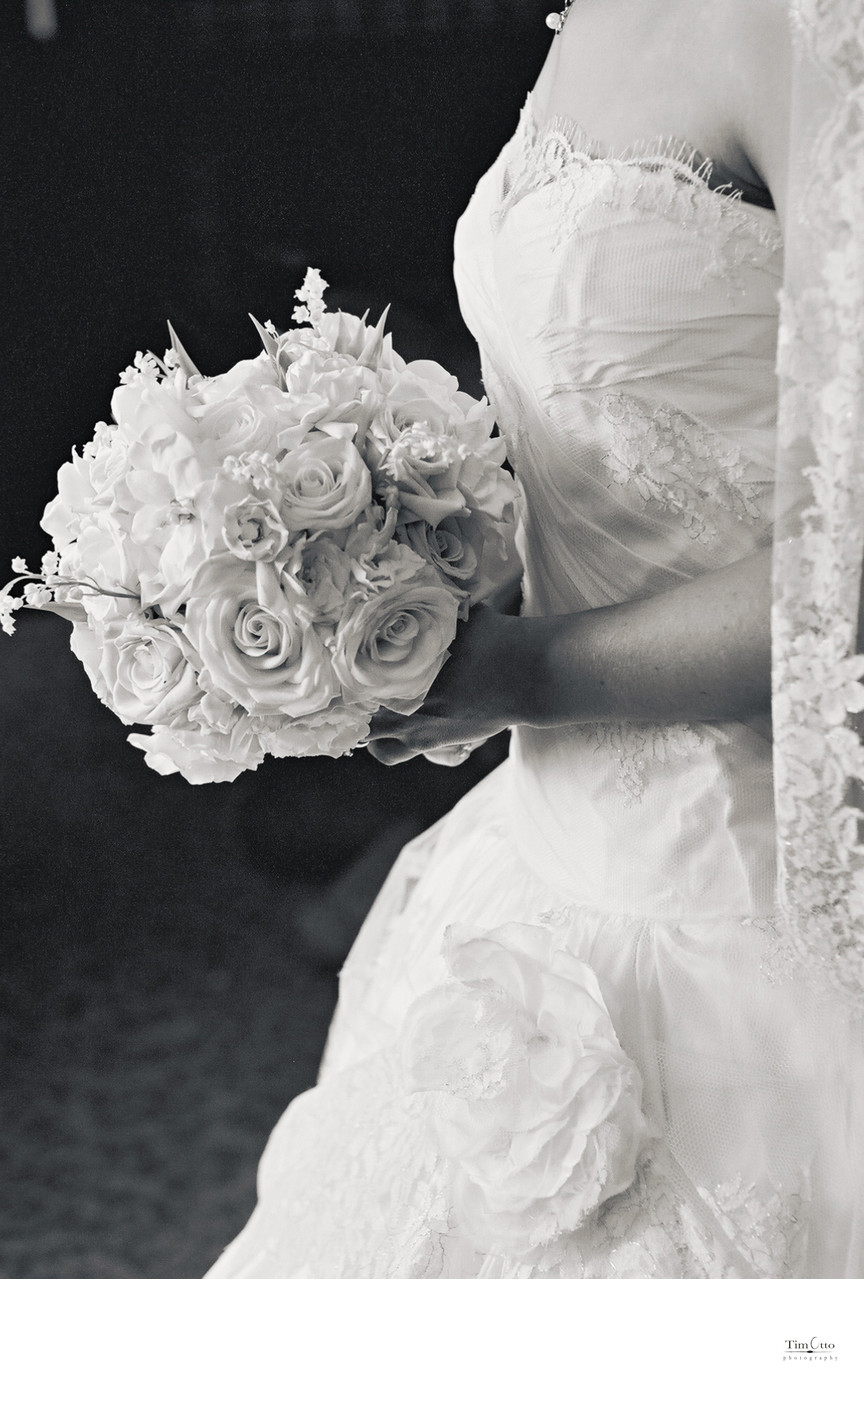 Detail Photo of Brides Bouquete and Dress